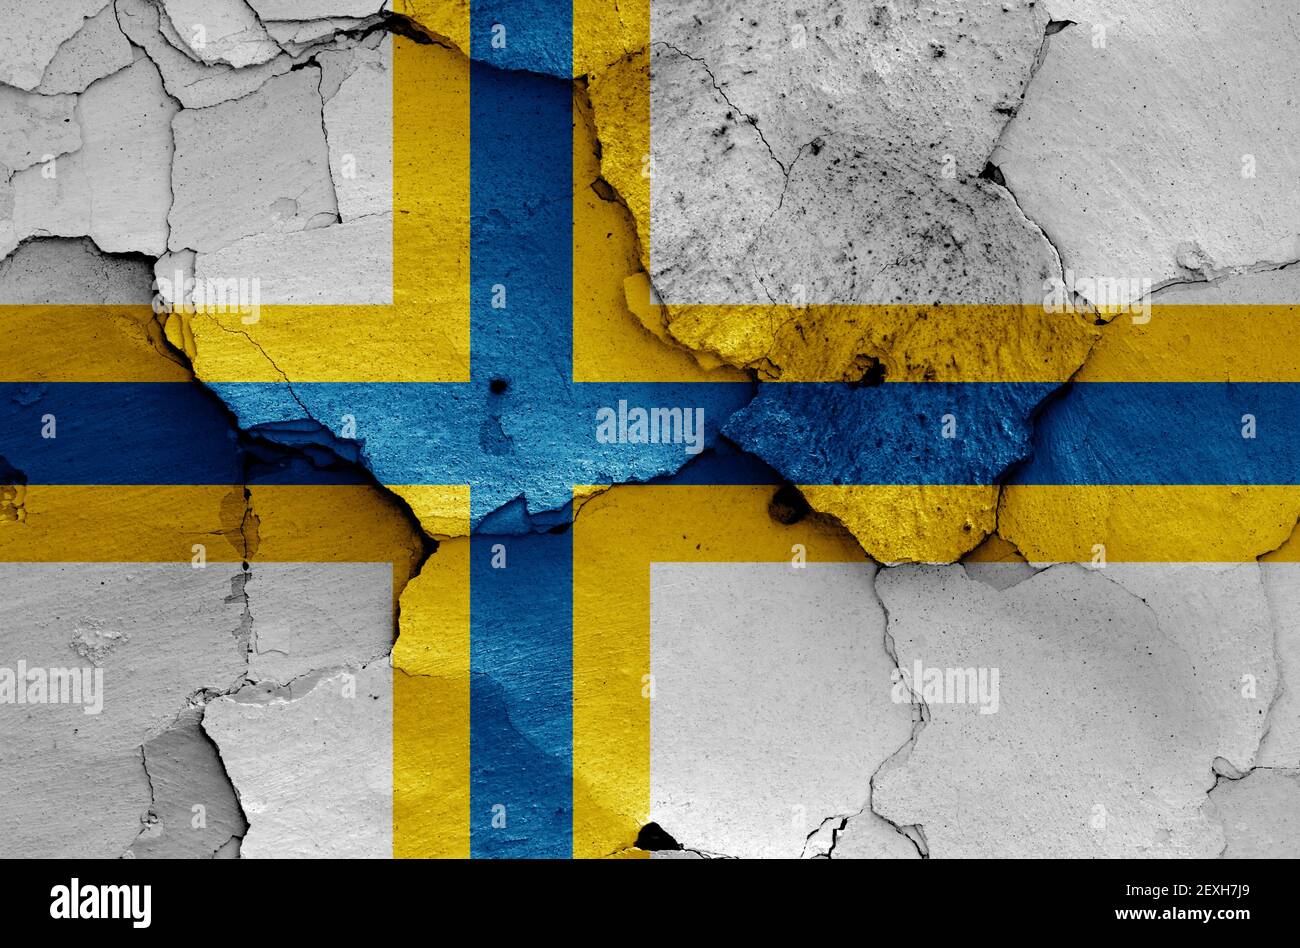 flag of Sweden Finns painted on cracked wall Stock Photo